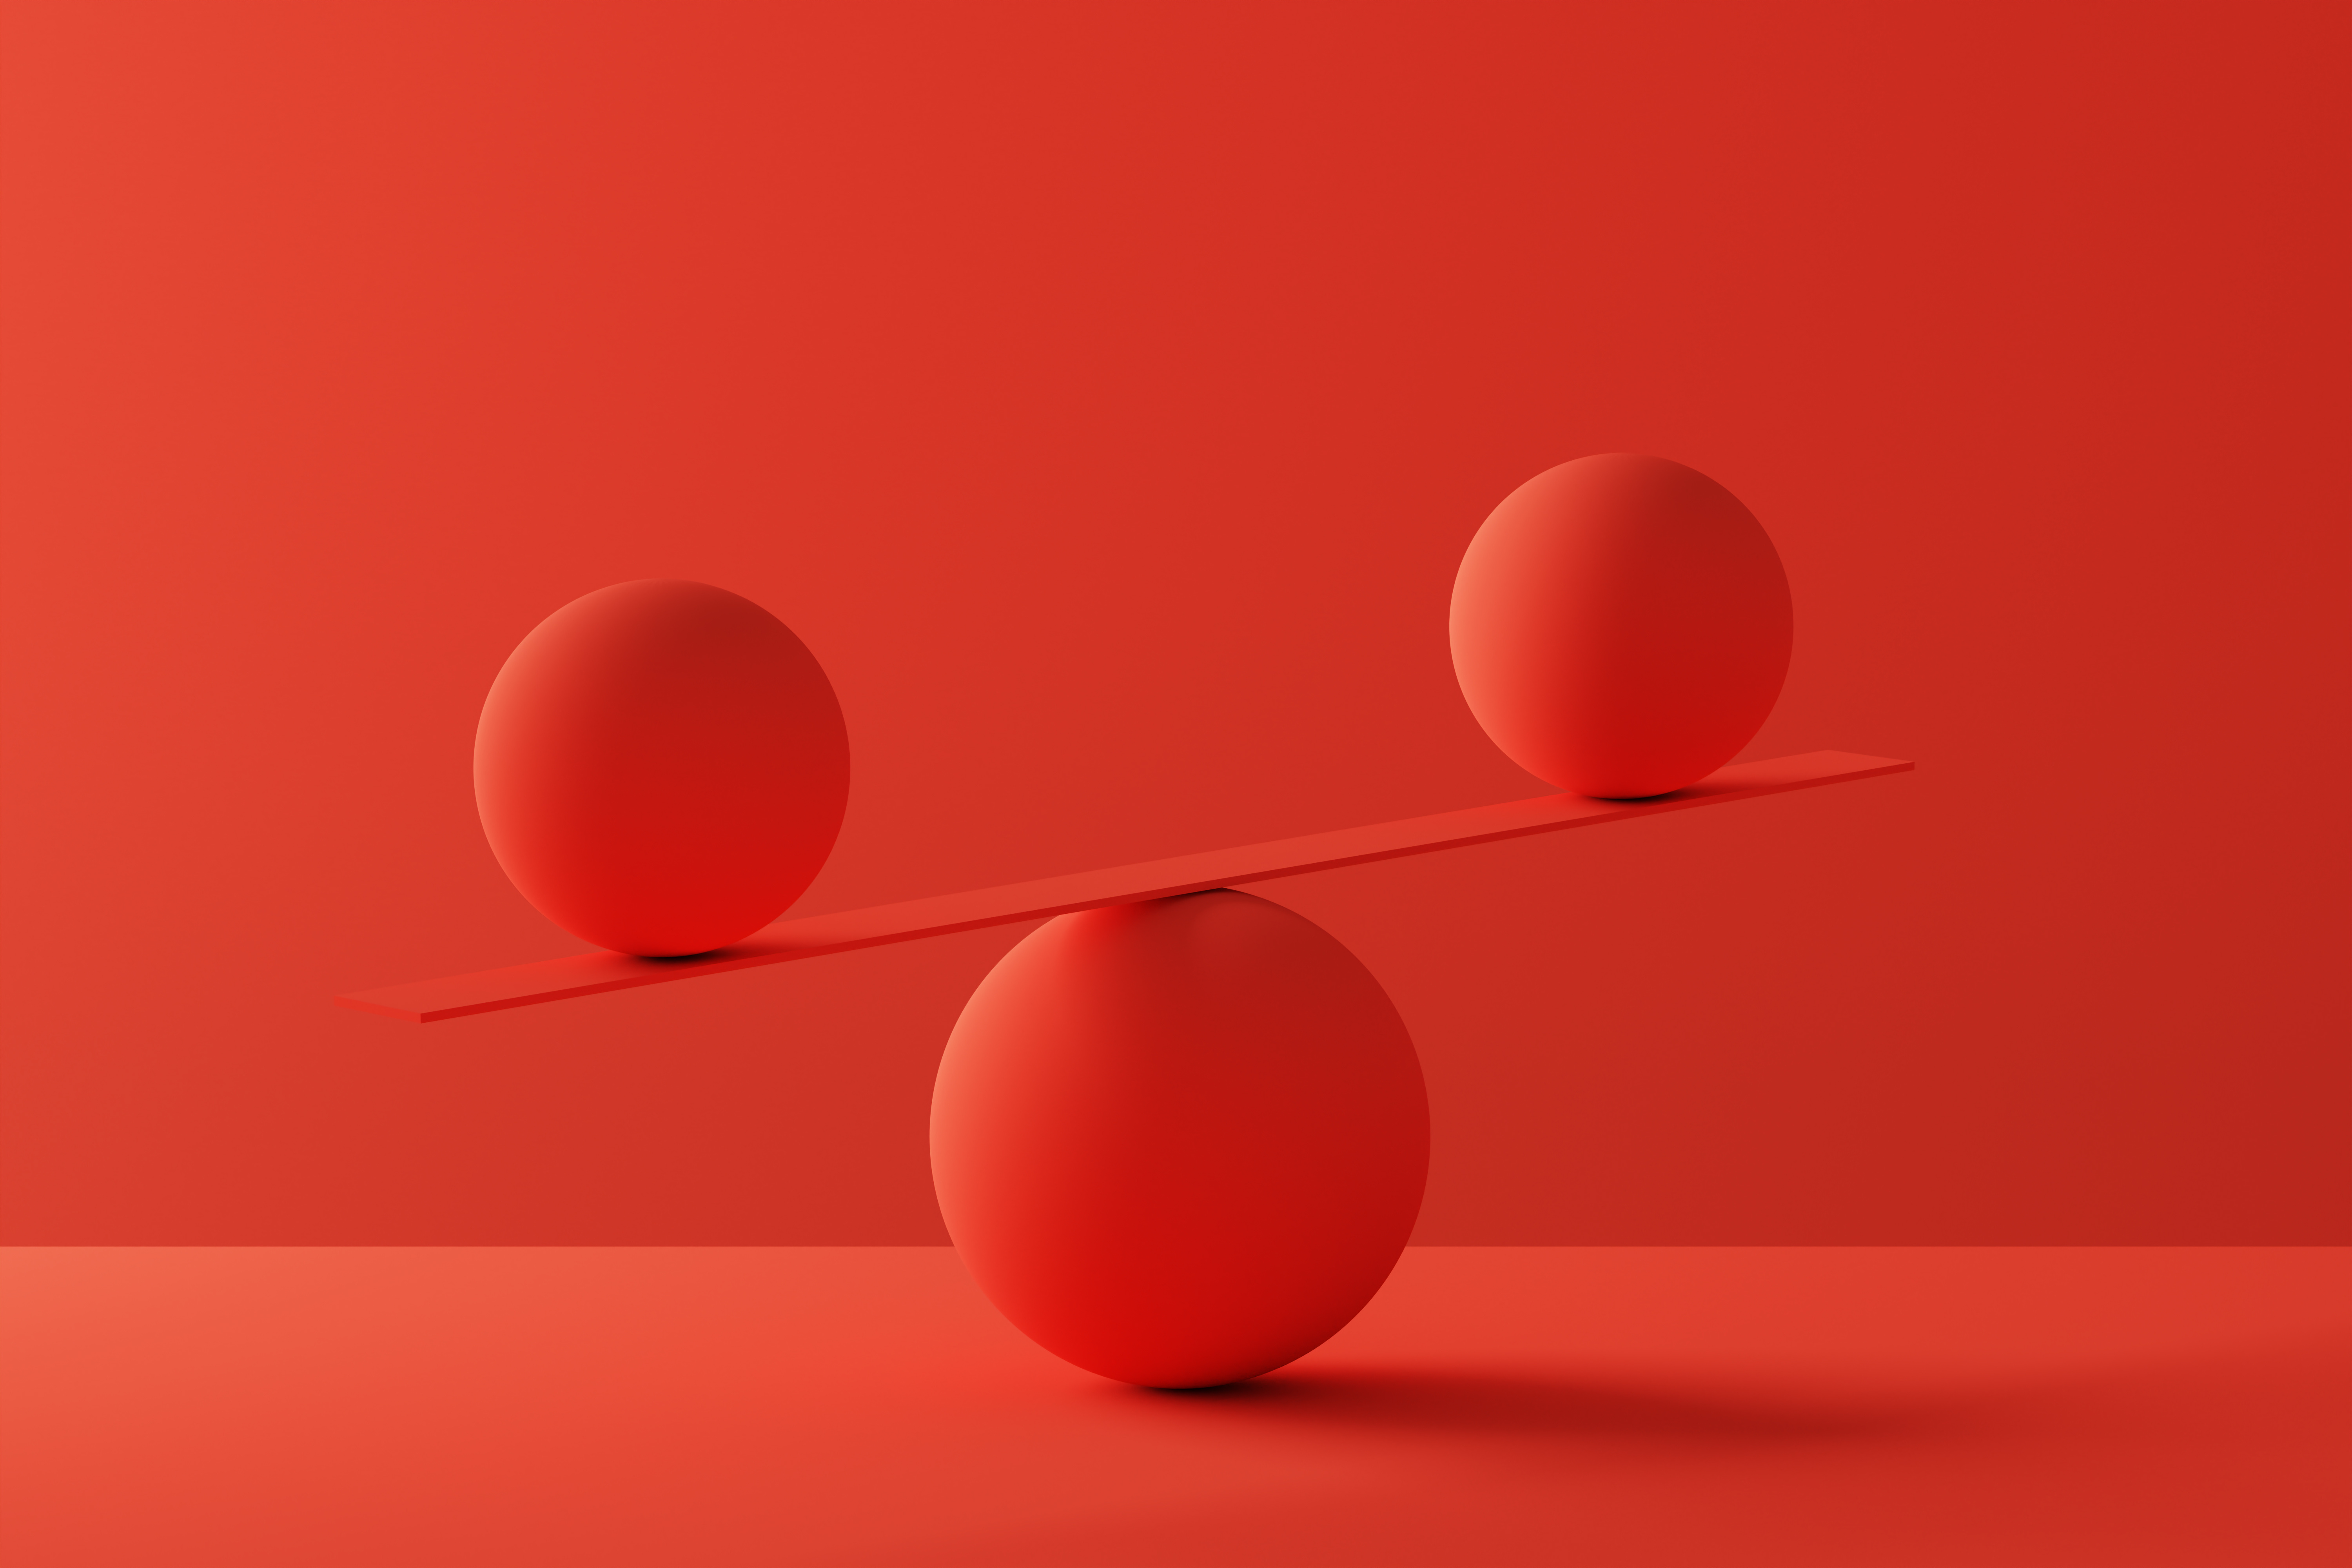 Two spheres in perfect balance over red background